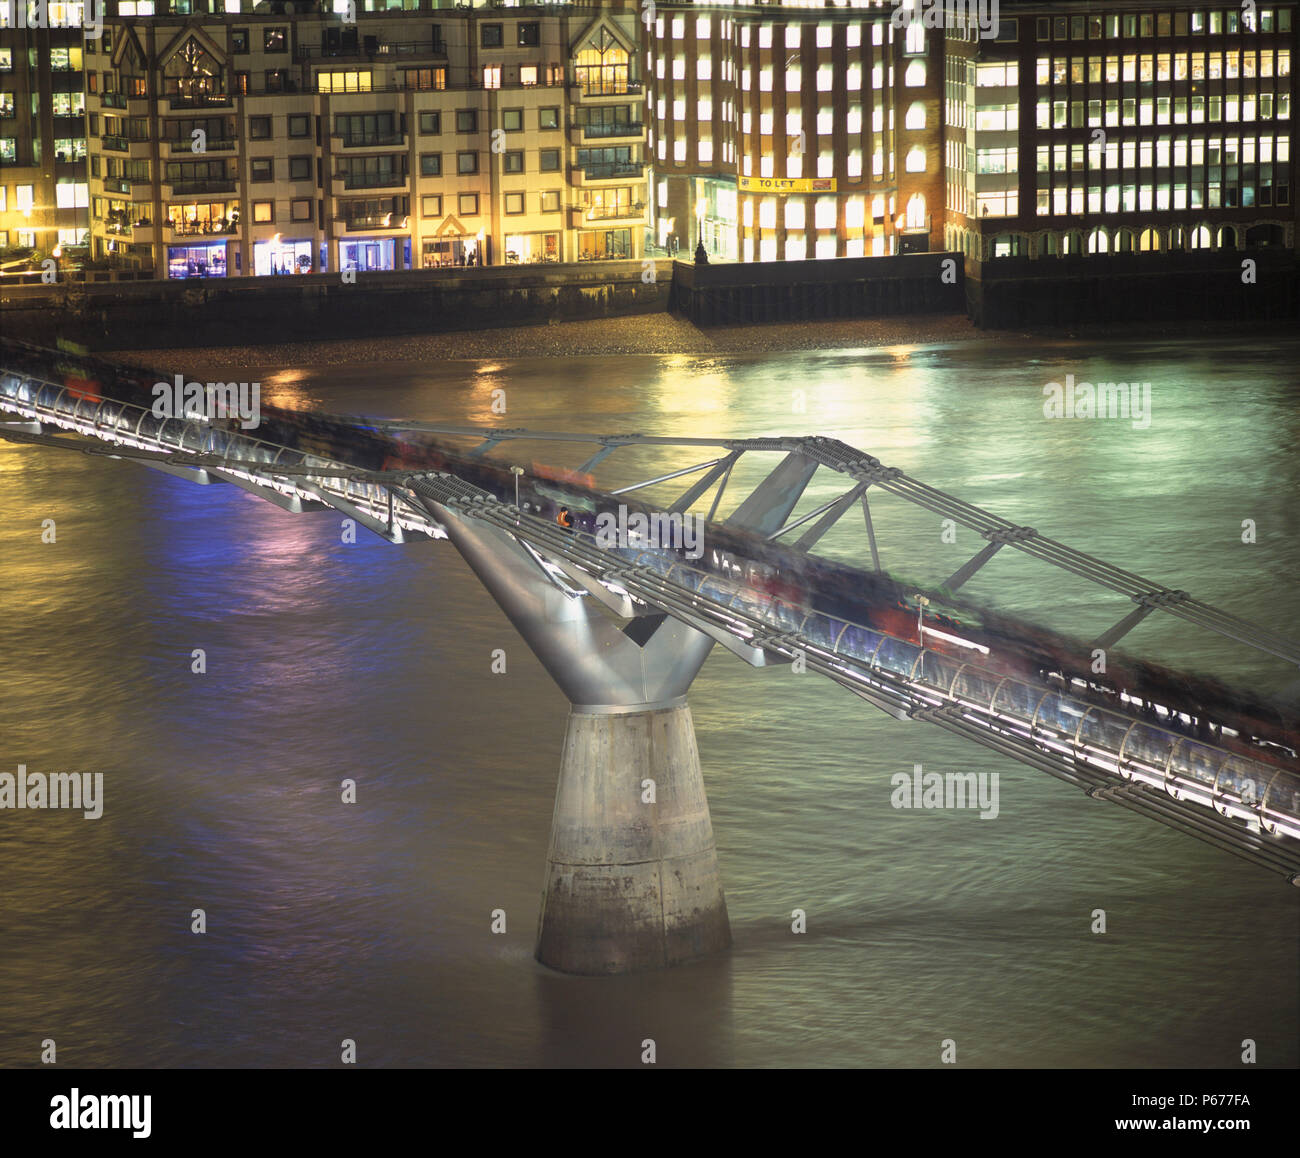 Millennium Bridge. London, United Kingdom. Designed by Norman Foster and Partners. Stock Photo